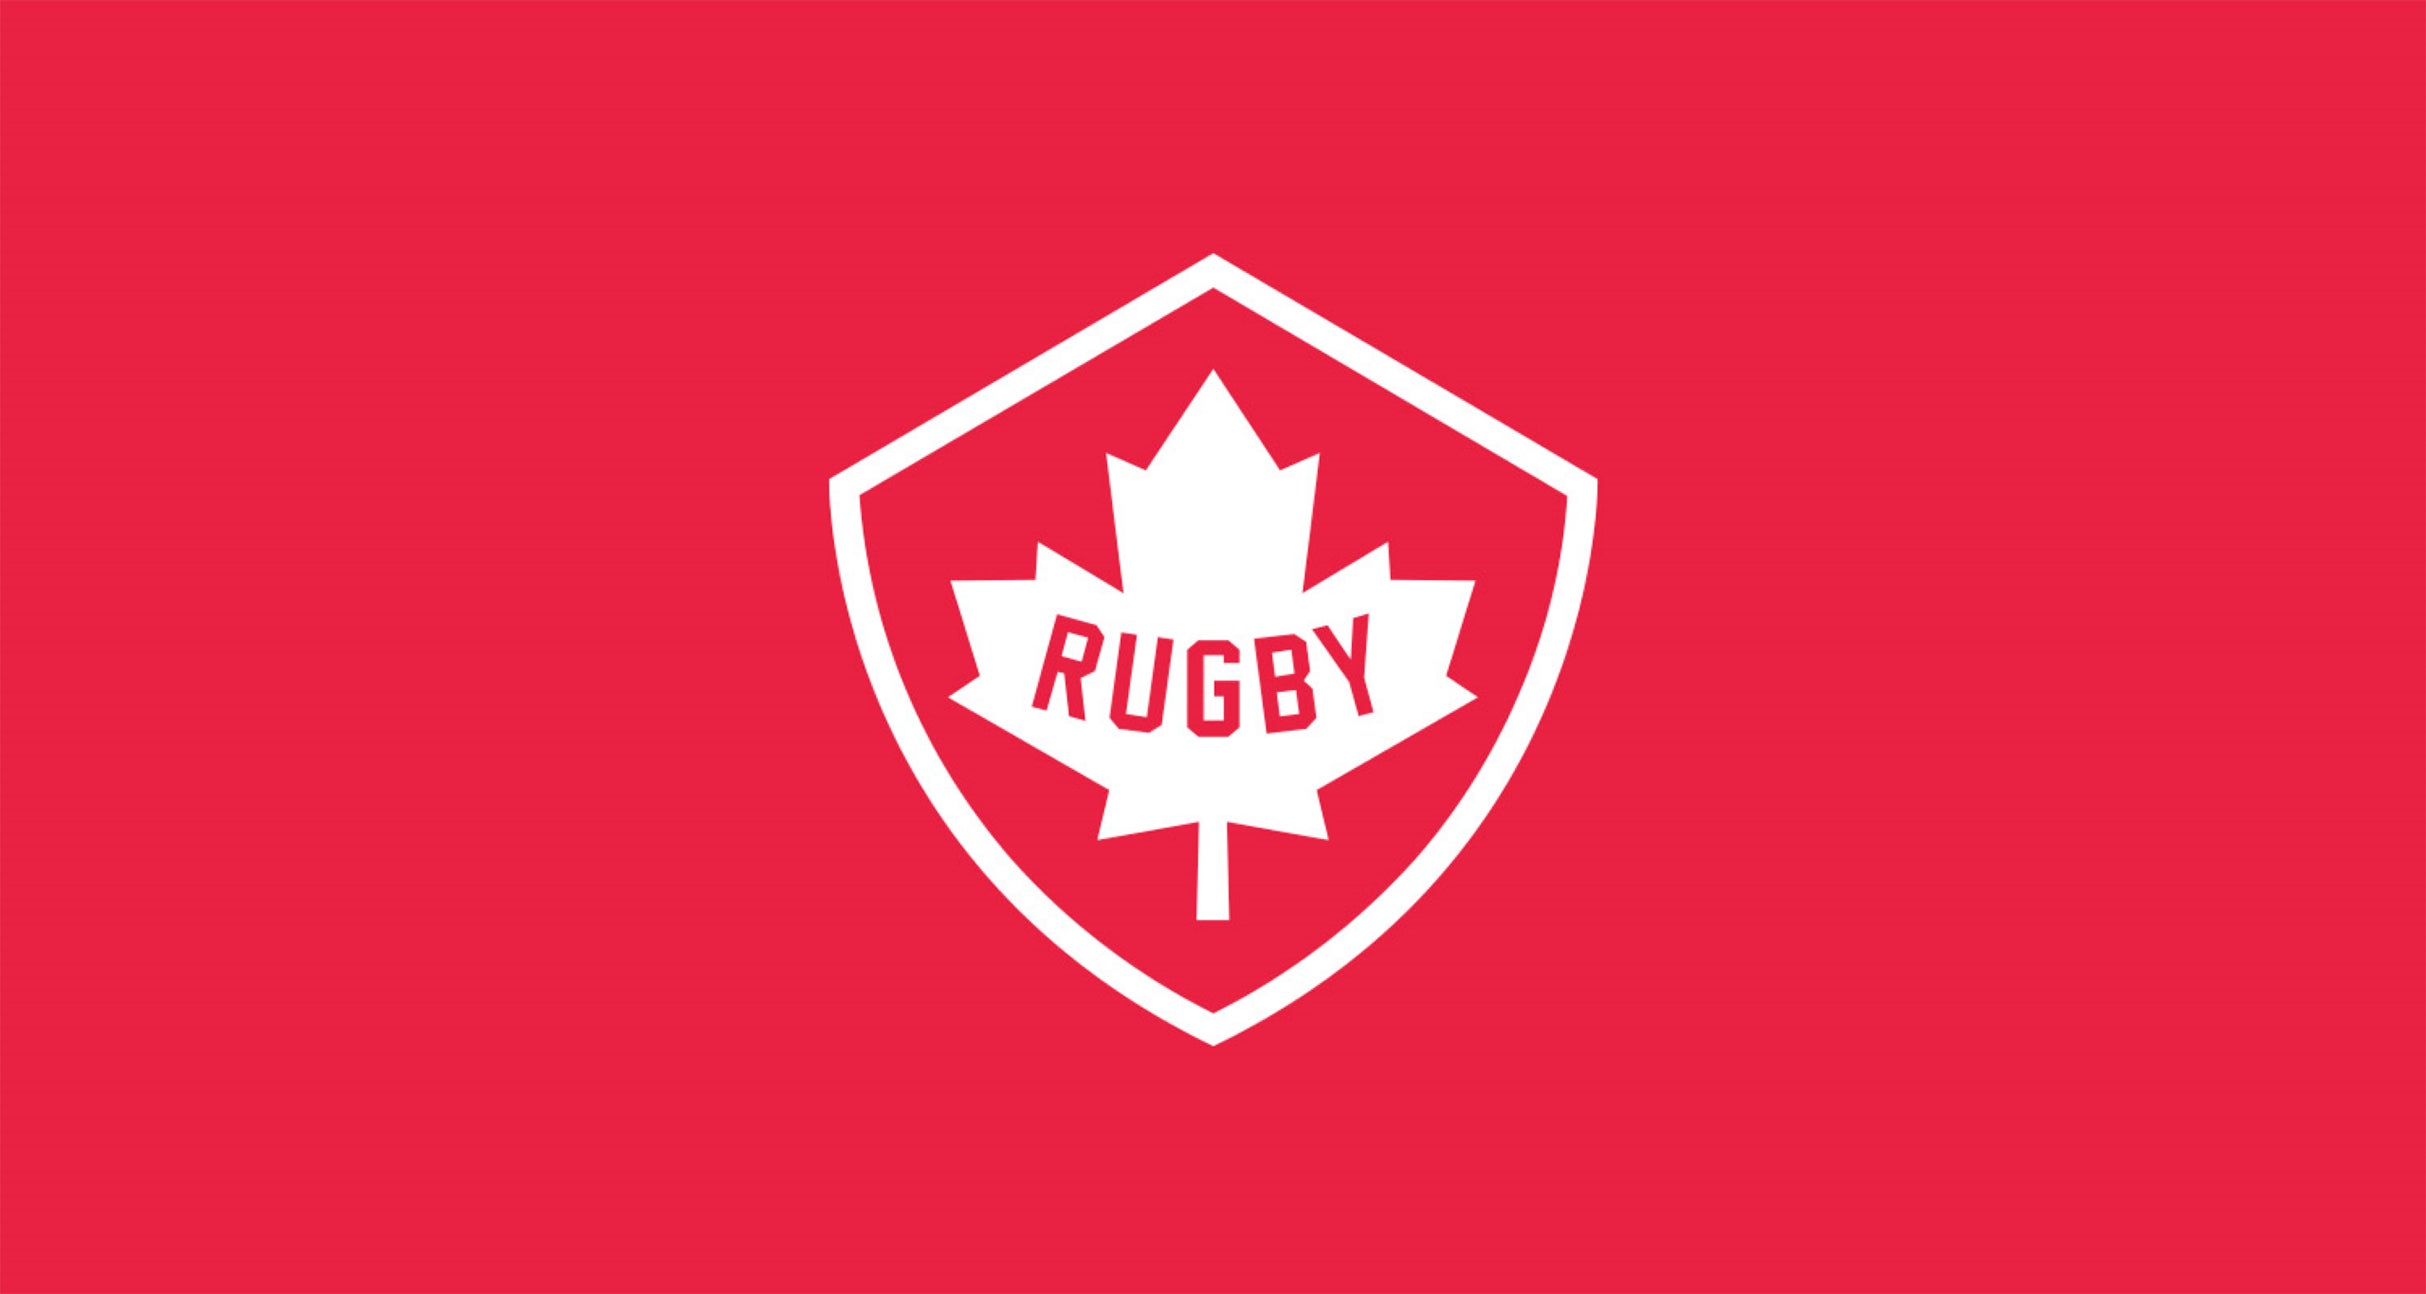 Rugby Sevens, Paris 2024 Qualification Event Package in Victoria promo photo for Rugby Canada Insider presale offer code